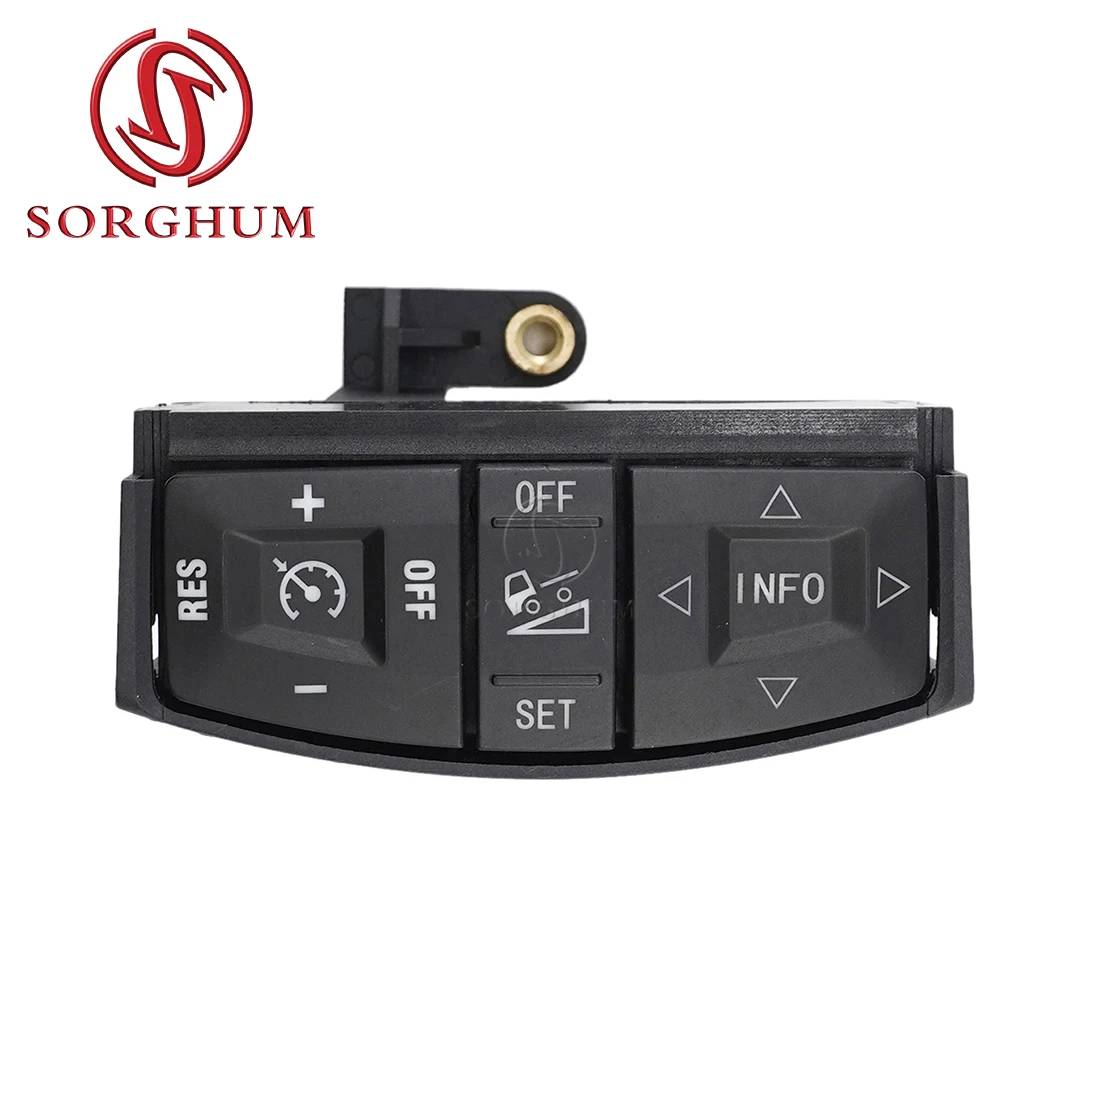 SORGHUM 1486287 For SCANIA P, G, R, T; F, K, N Series Truck Steering Wheel Multi-Control Switch Knobs 1486287S51 Car Accessories